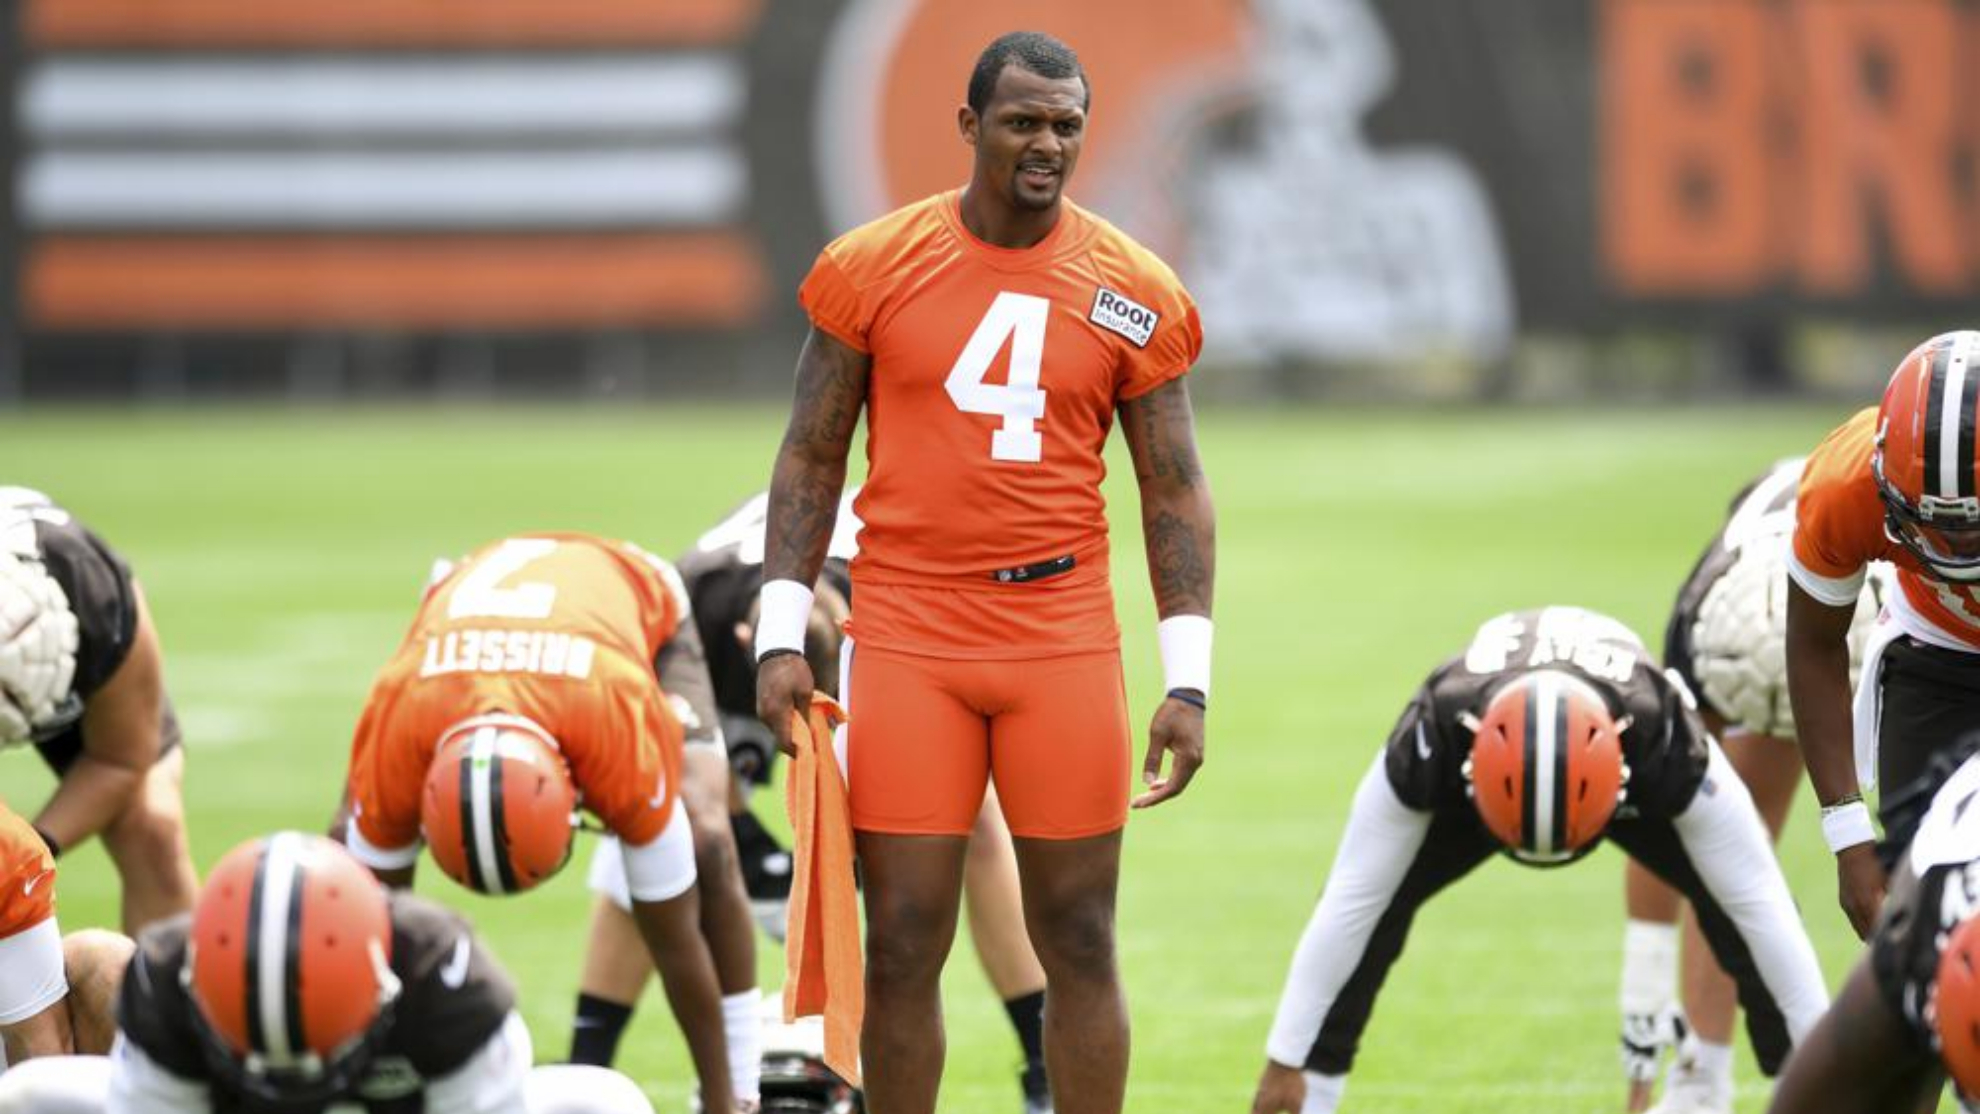 Reports: Deshaun Watson's NFL disciplinary case ruling is expected Monday